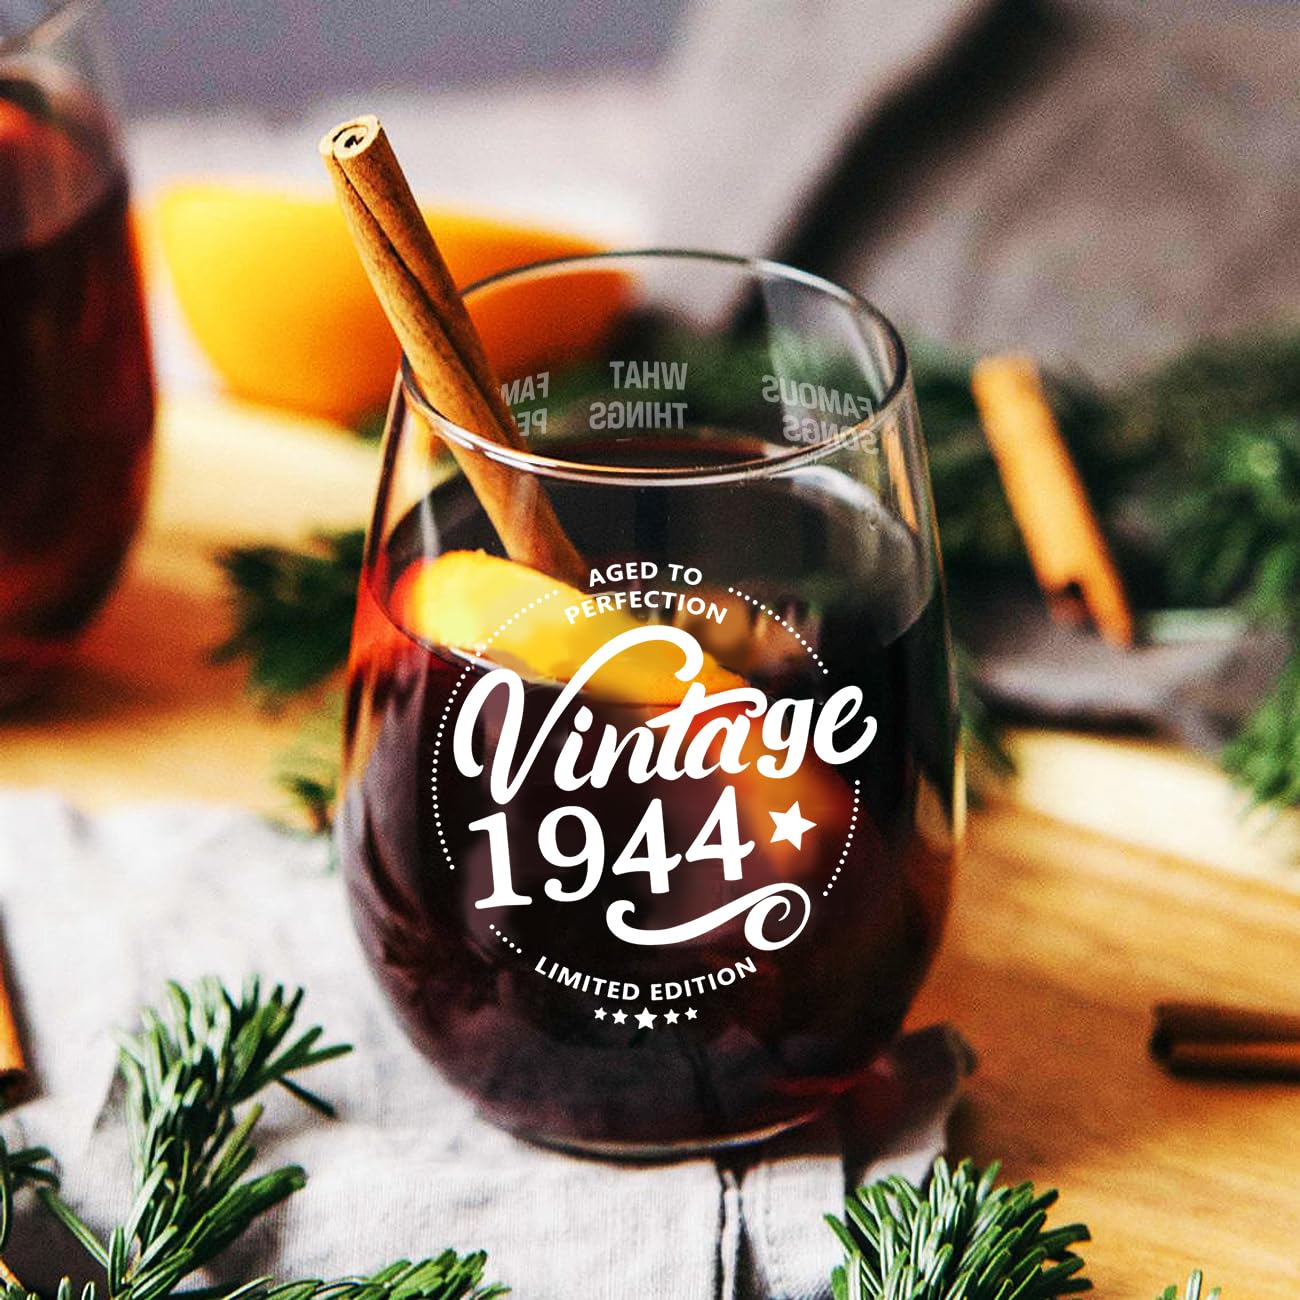 Greatingreat 1944 Old Time Information 80th Birthday Gifts for Women Men - 1944 Vintage 15 oz Stemless Wine Glass - 80 Year Old Birthday Party Decorations - Eighty Class Reunion Ideas